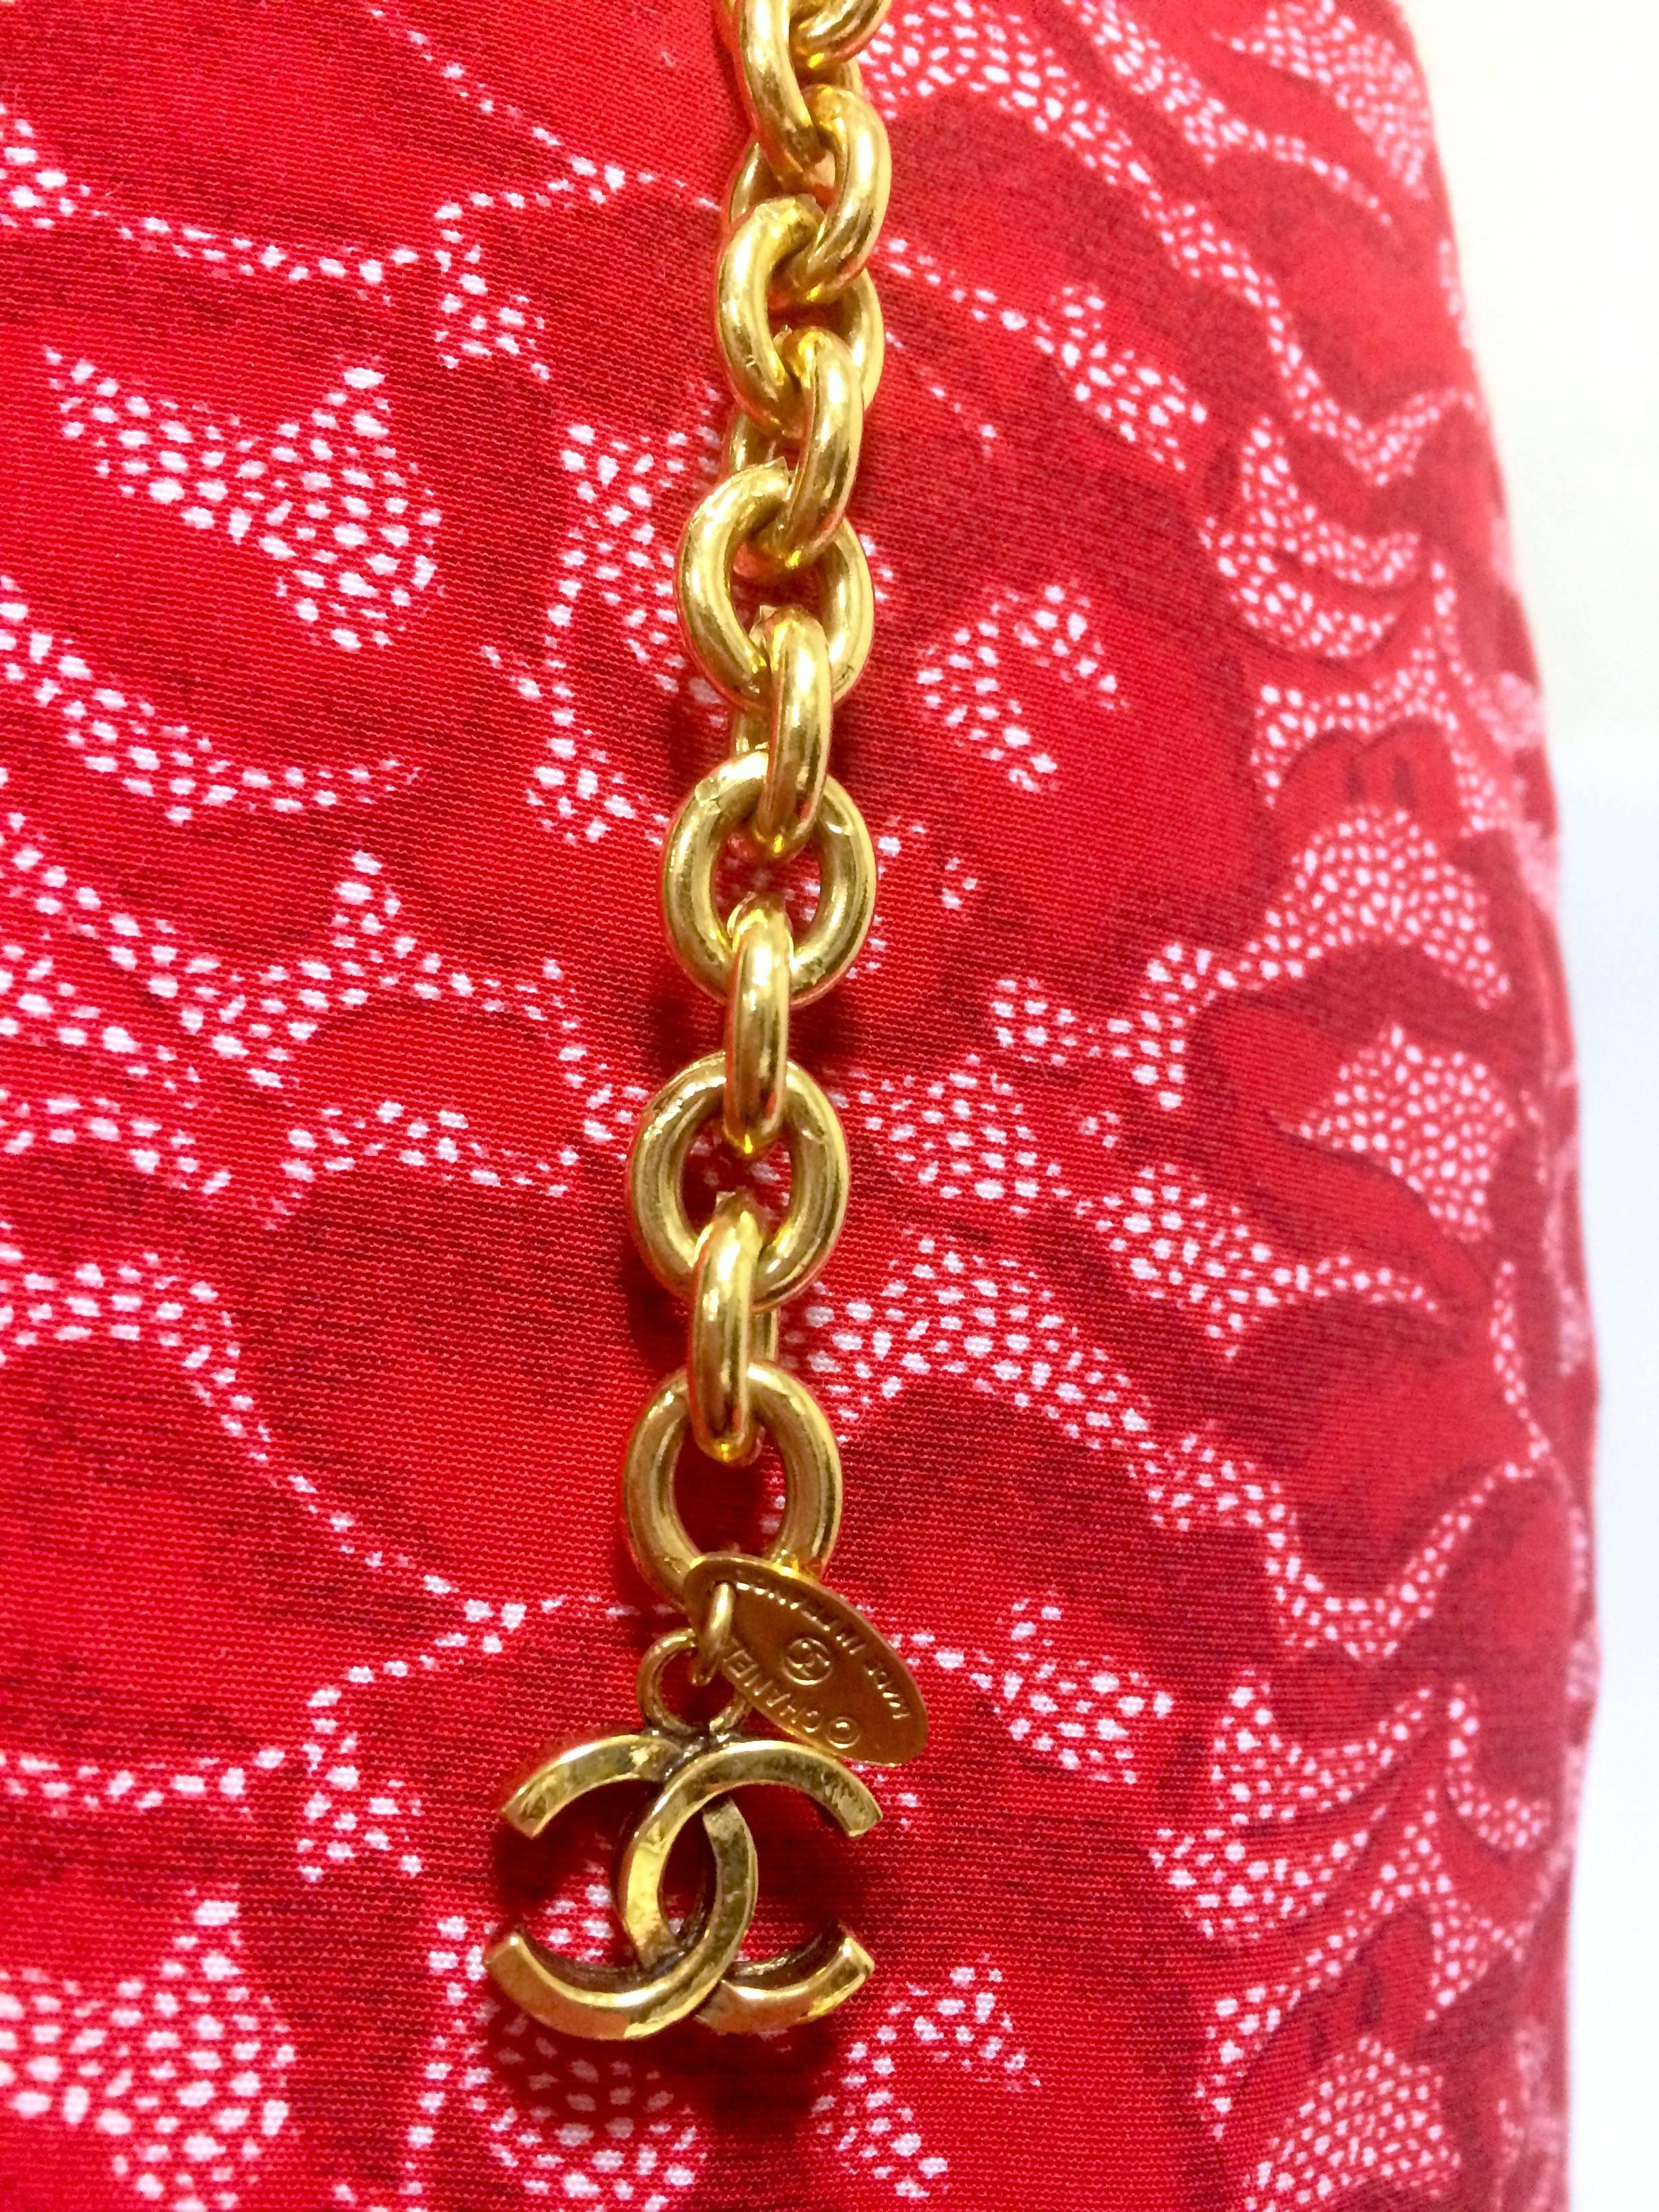 Women's MINT. Vintage CHANEL golden chain belt with triple layer chains and 3 CC marks